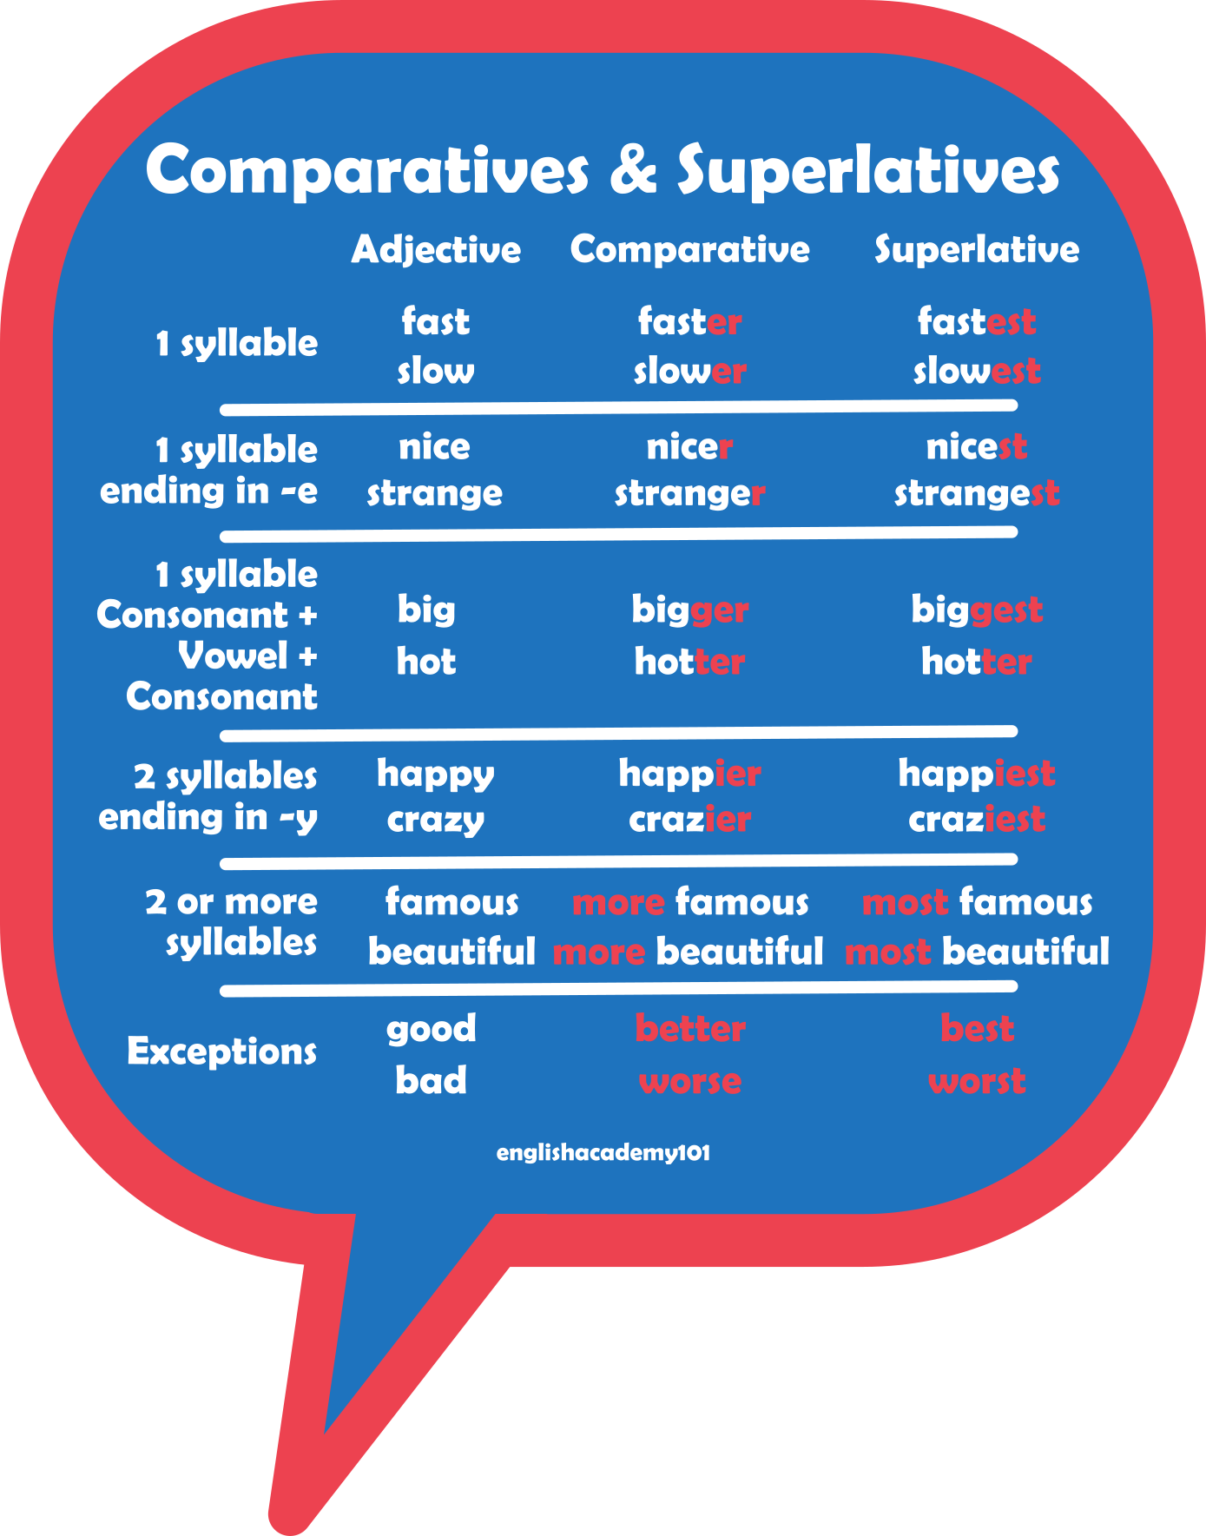 comparatives-archives-englishacademy101